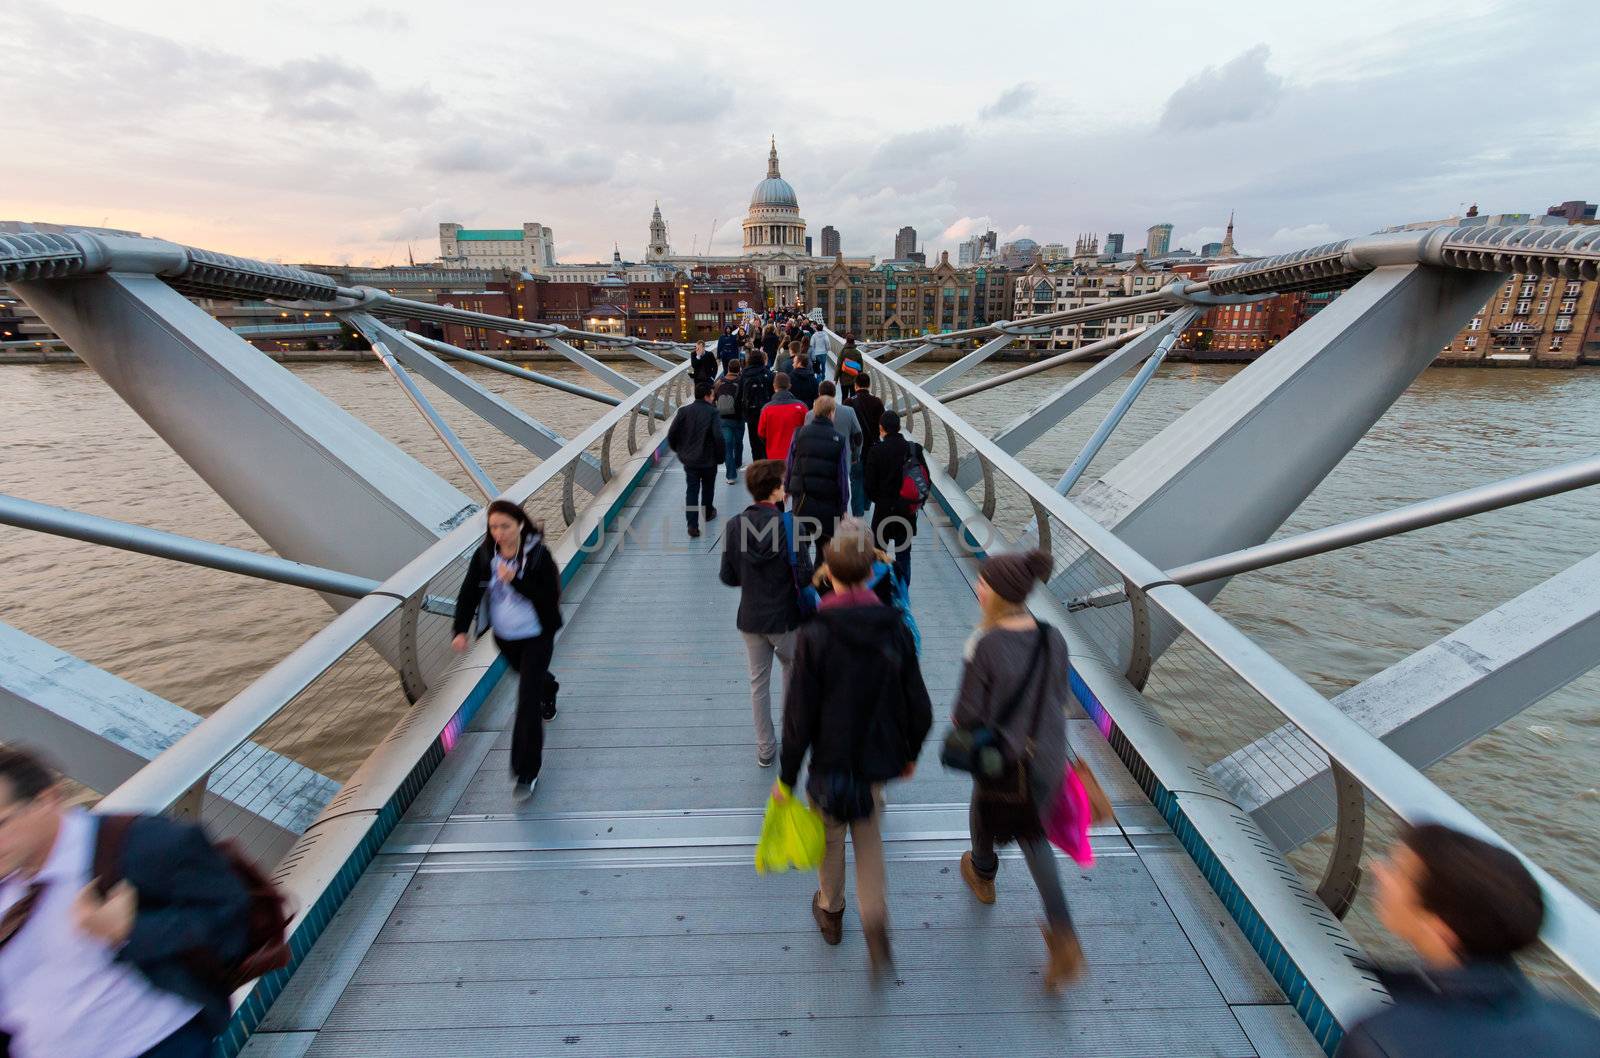 St Pauls cathedral view from the Millennium Bridge, London  by Antartis